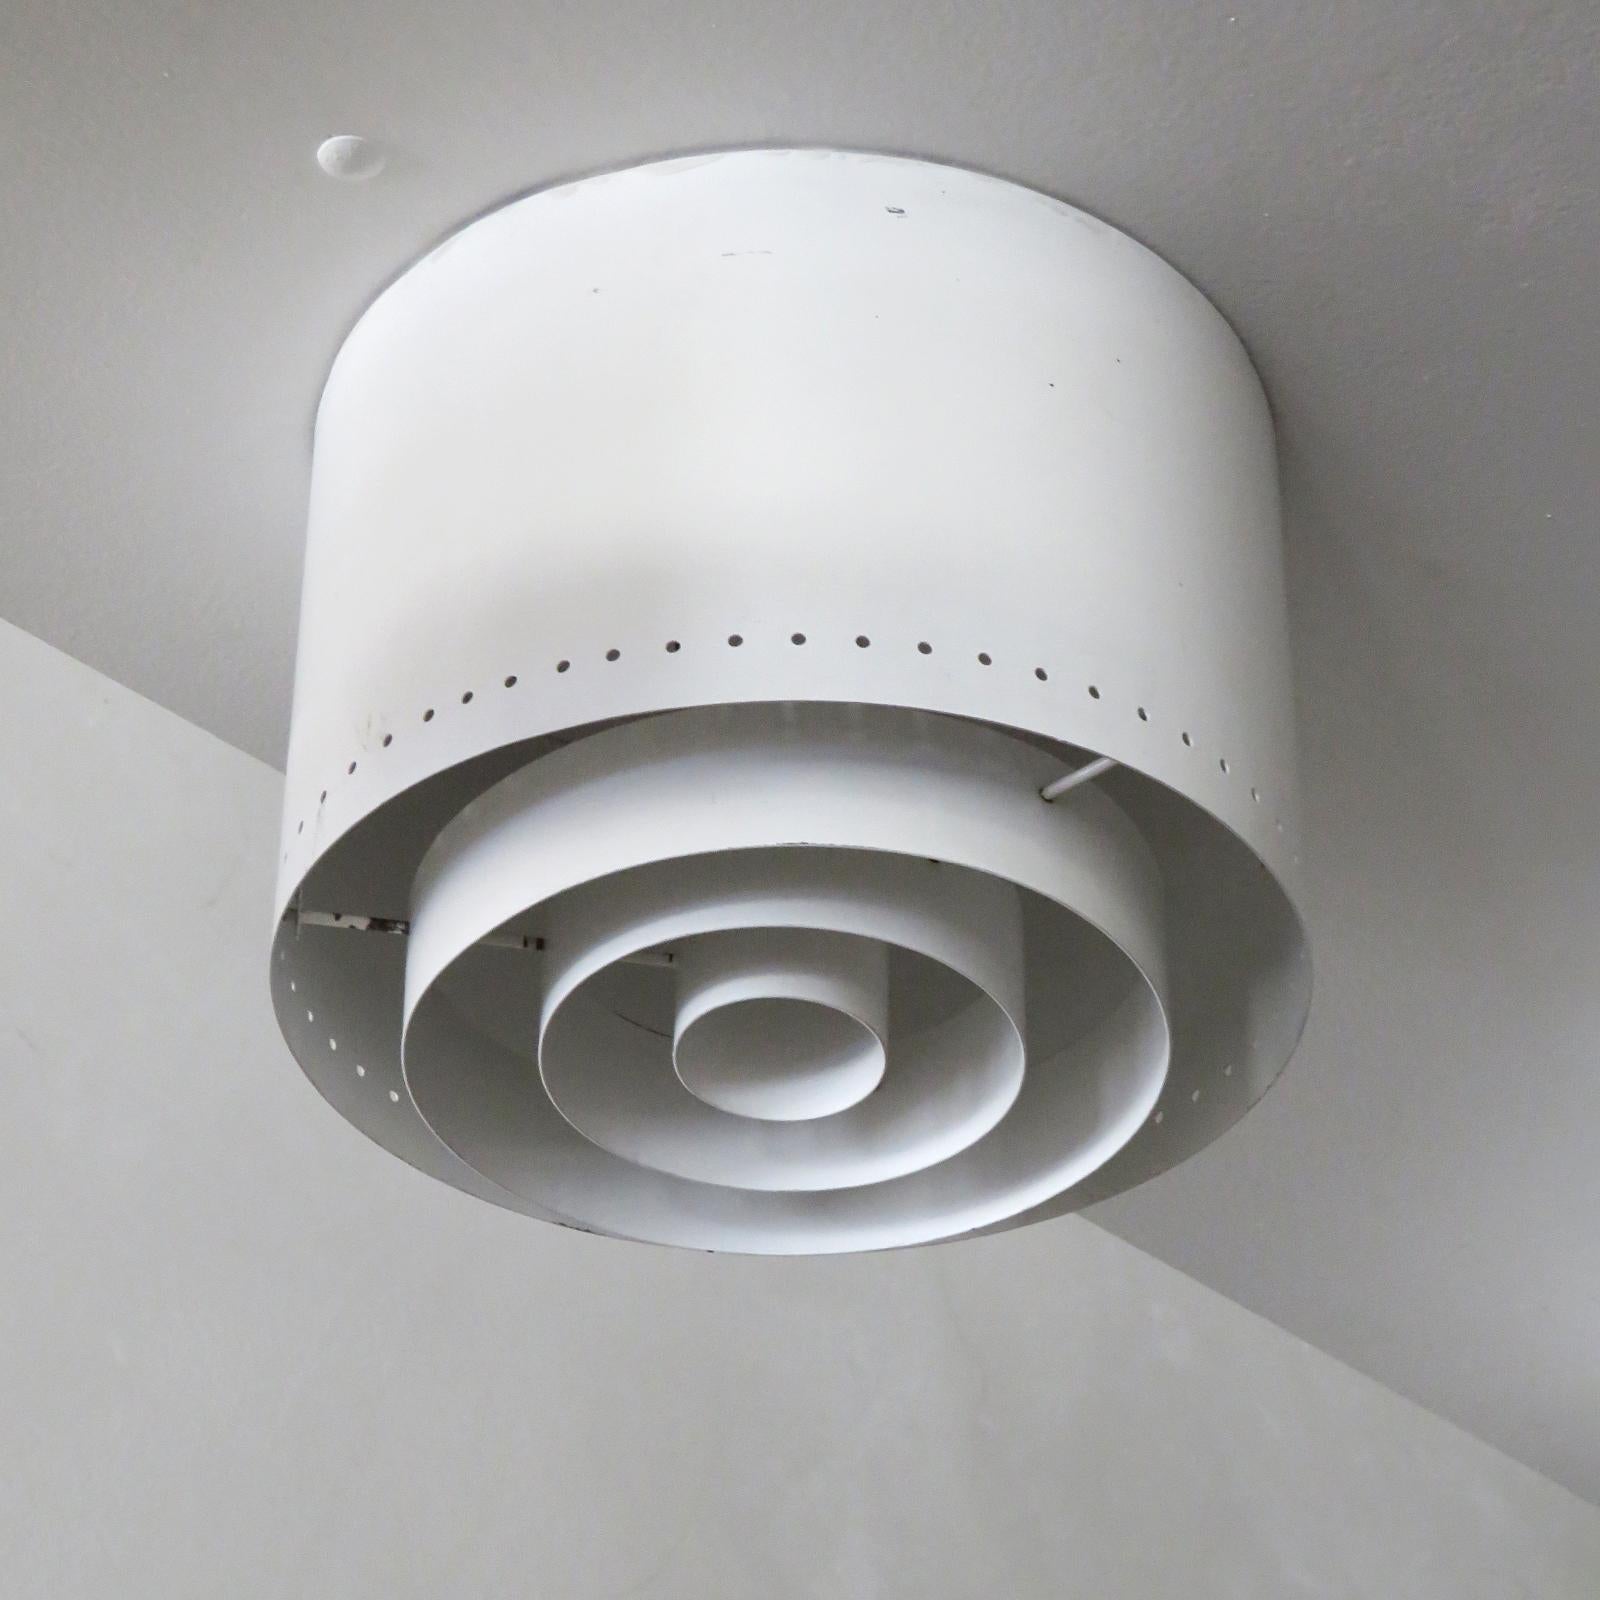 Elegant cylindrical white ceiling flush mounts model 'AE 97/25' by Itsu, Finland, 1960s, perforations along the bottom edge, with a detachable set of three circular diffusers, wired for US standards, one E27 socket per fixture, max. wattage 100w